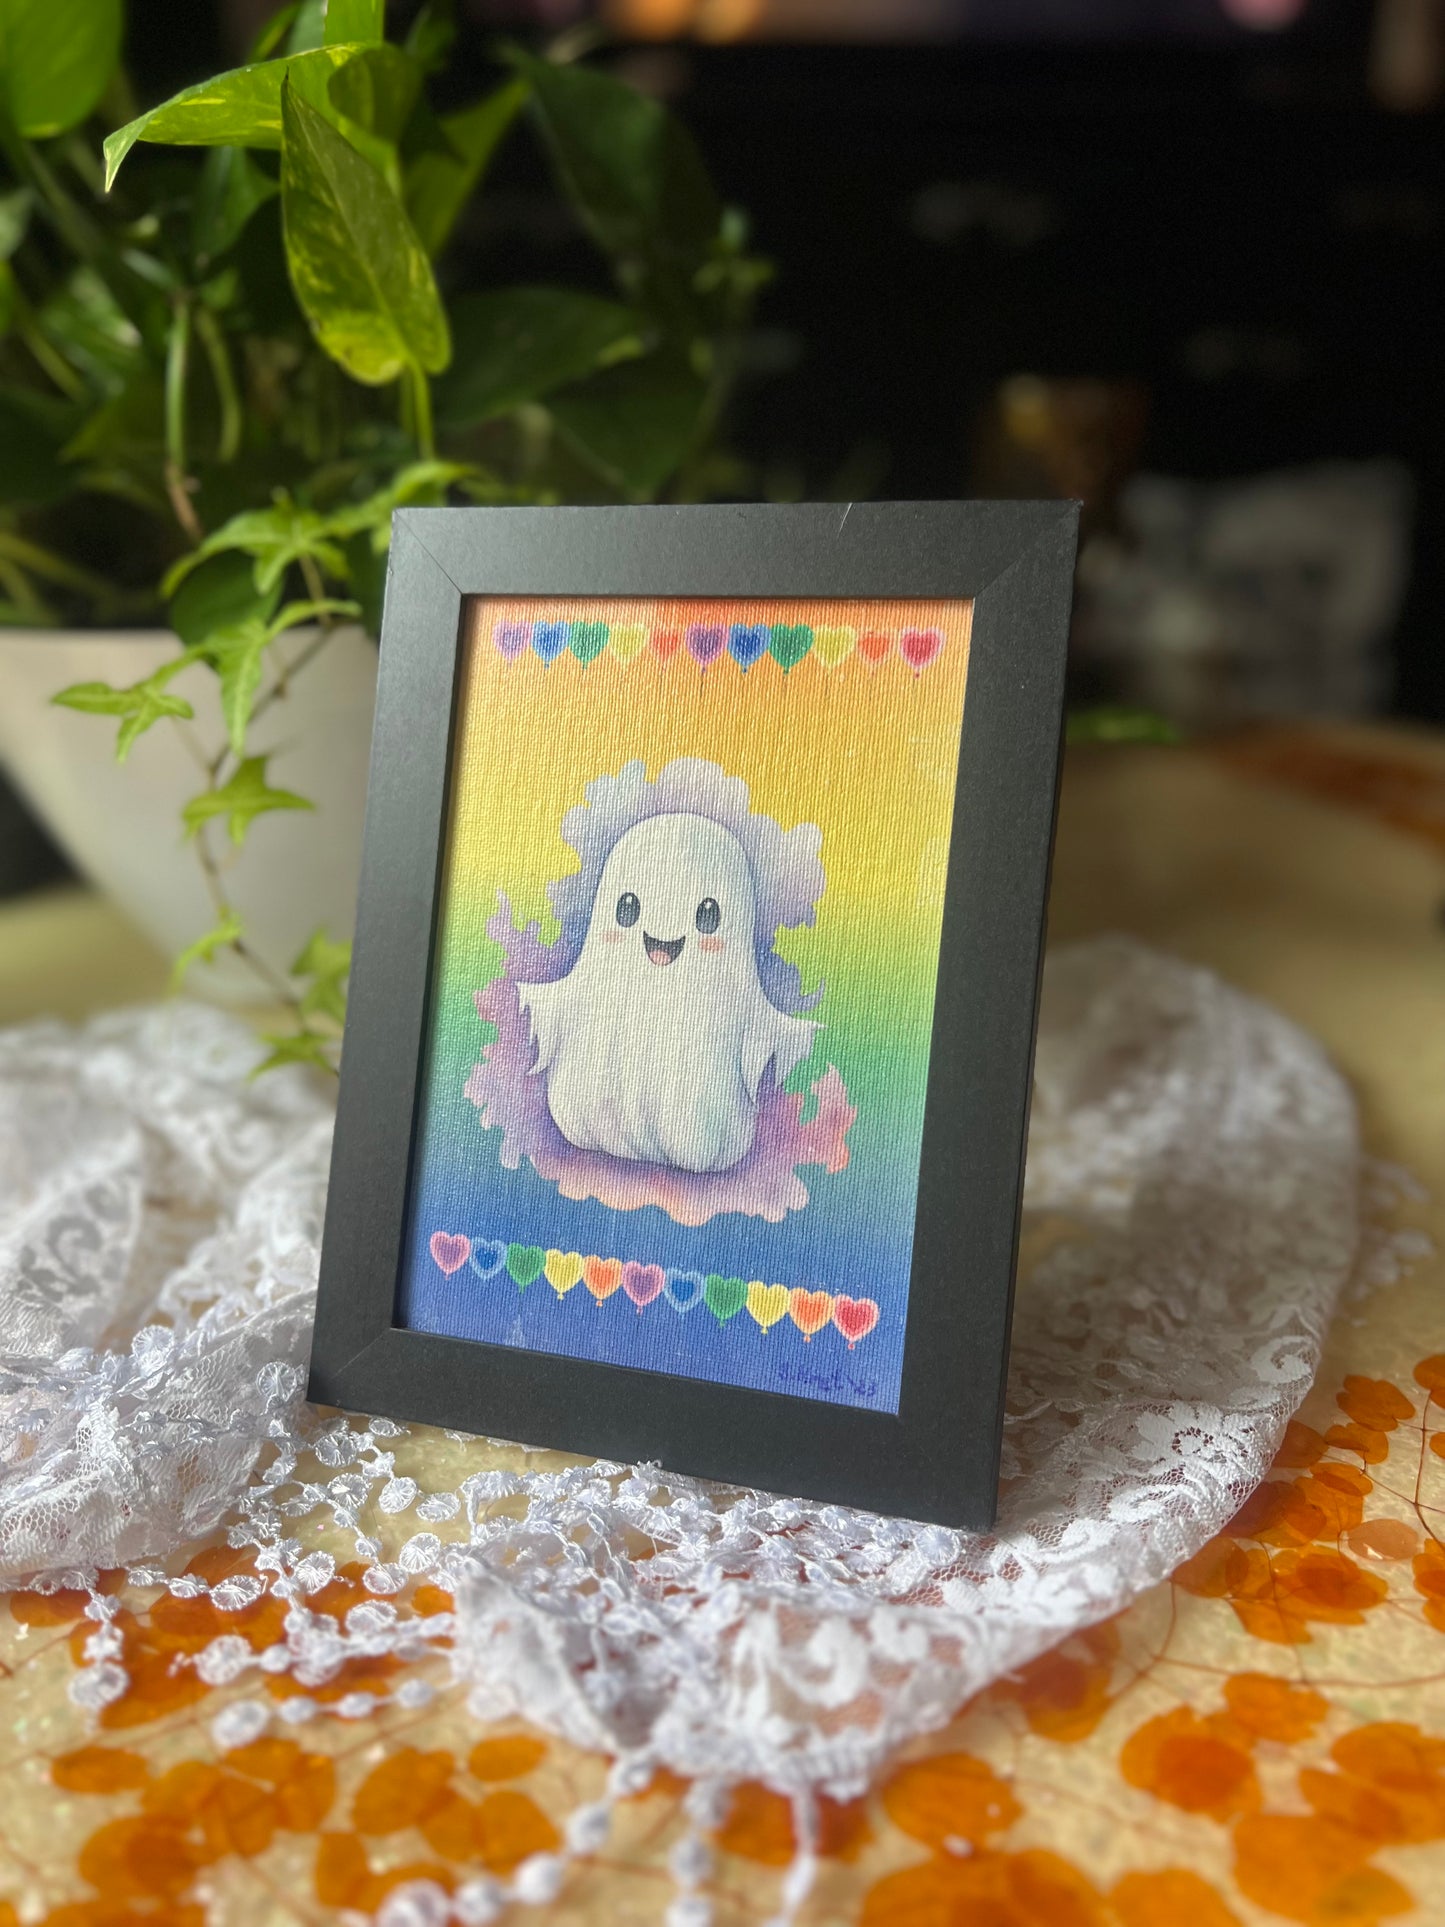 Cute Ghost Picture, Wall Hanging, Tabletop Display, Hearts and Rainbows